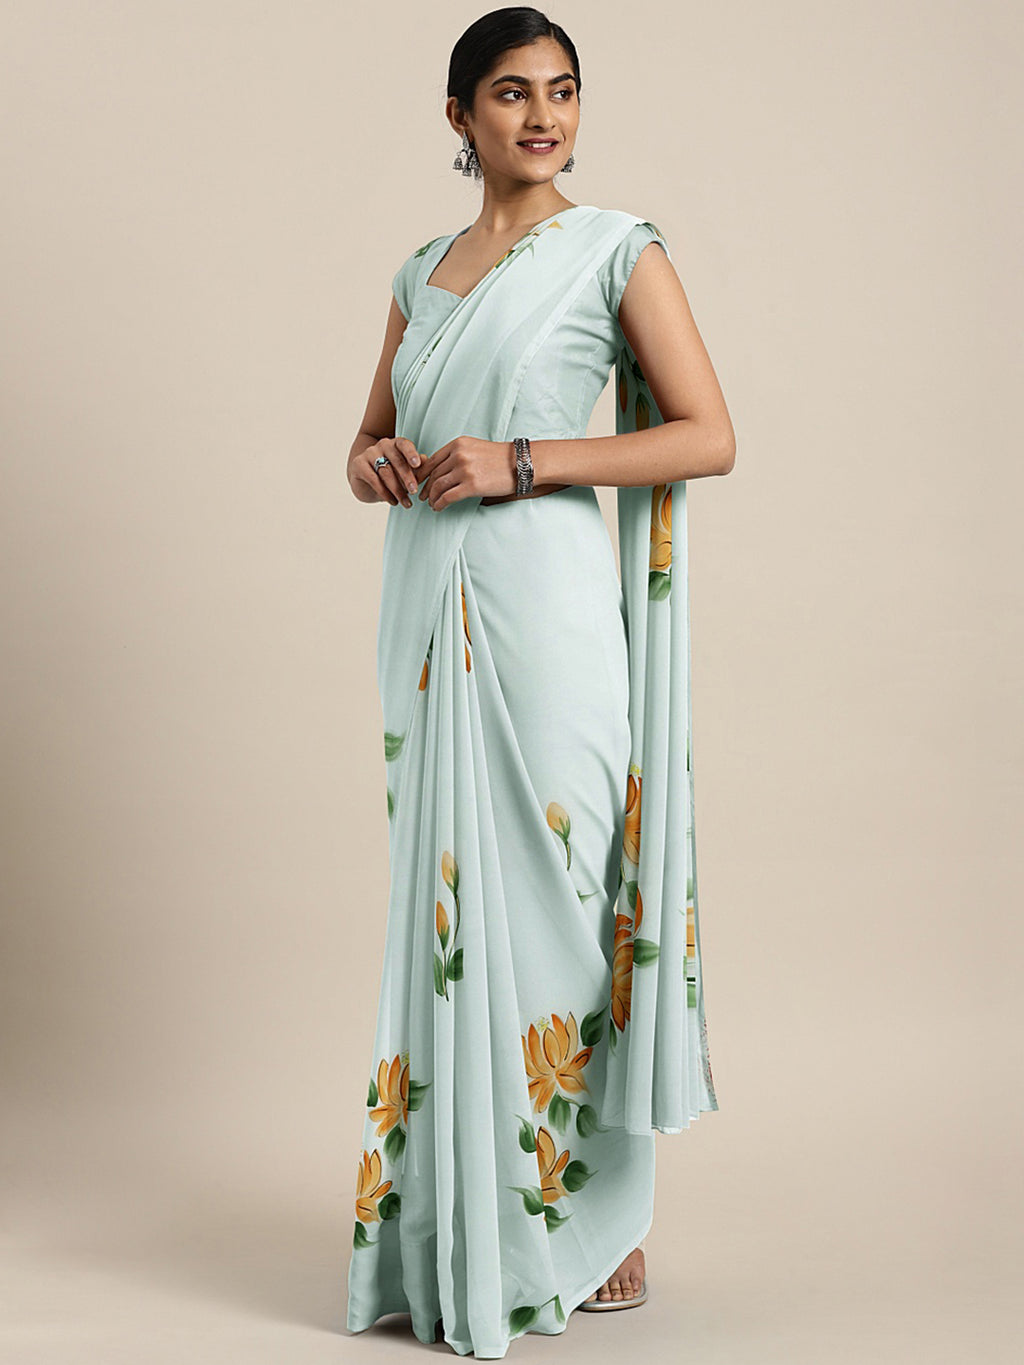 Kalakari India Organza Hand Painted Saree With Blouse BHKPSA0162-Saree-Kalakari India-BHKPSA0162-Bollywood, Fashion, Geographical Indication, Hand Crafted, Heritage Prints, Natural Dyes, Organza, Sarees, Sustainable Fabrics, Woven-[Linen,Ethnic,wear,Fashionista,Handloom,Handicraft,Indigo,blockprint,block,print,Cotton,Chanderi,Blue, latest,classy,party,bollywood,trendy,summer,style,traditional,formal,elegant,unique,style,hand,block,print, dabu,booti,gift,present,glamorous,affordable,collectible,S